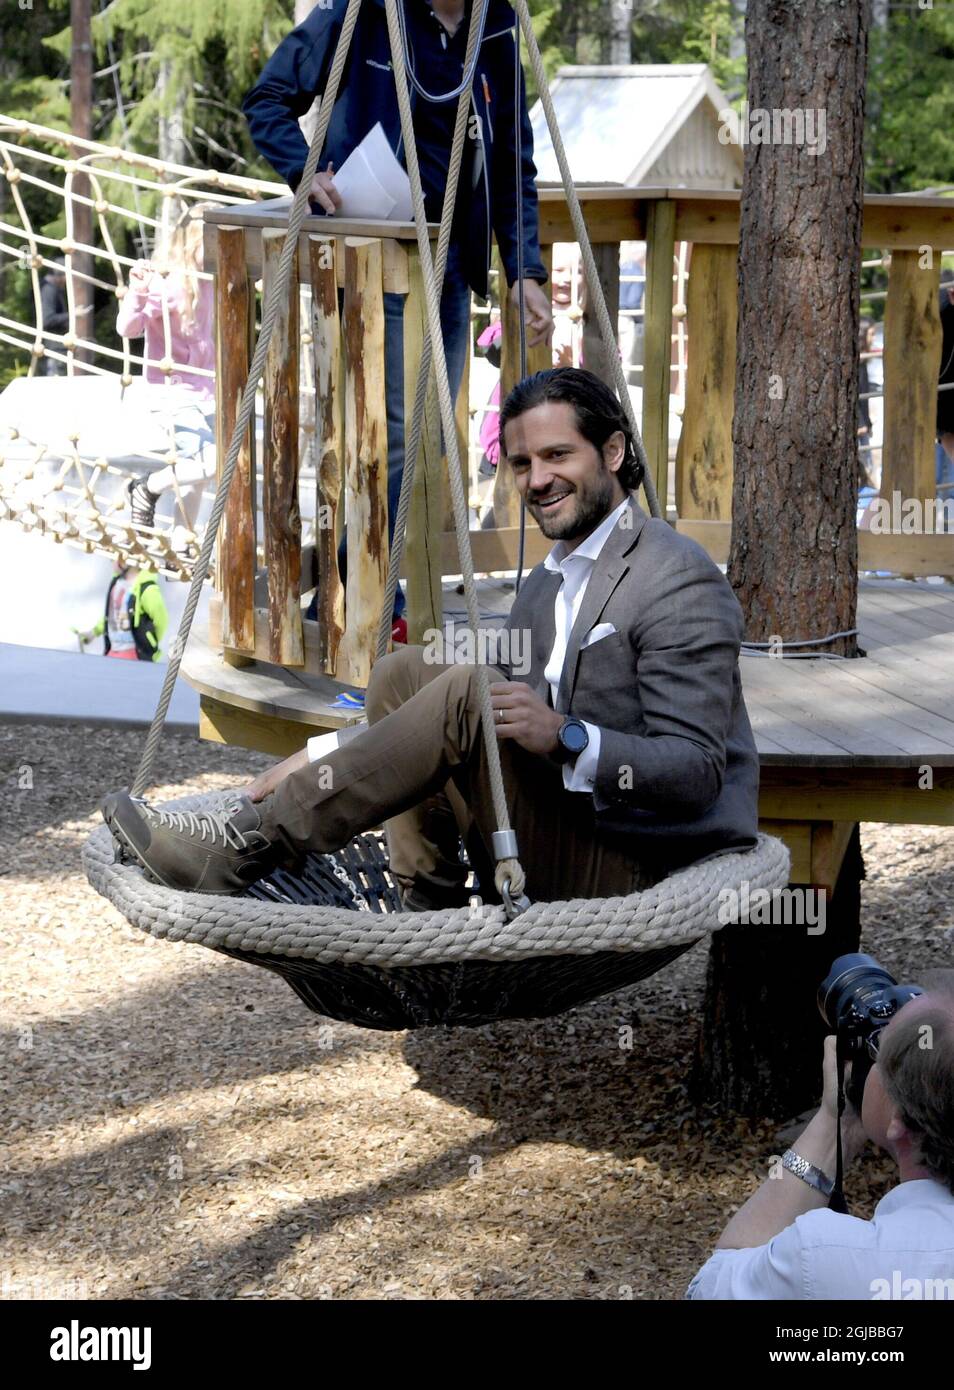 VASE 2018-05-17 Prince Carl Philip is seen with children during the  inauguration of the playground "Vilda Parken” in Vase, Varmland. The  Prince, who is the Duke of Varmland, is making a one